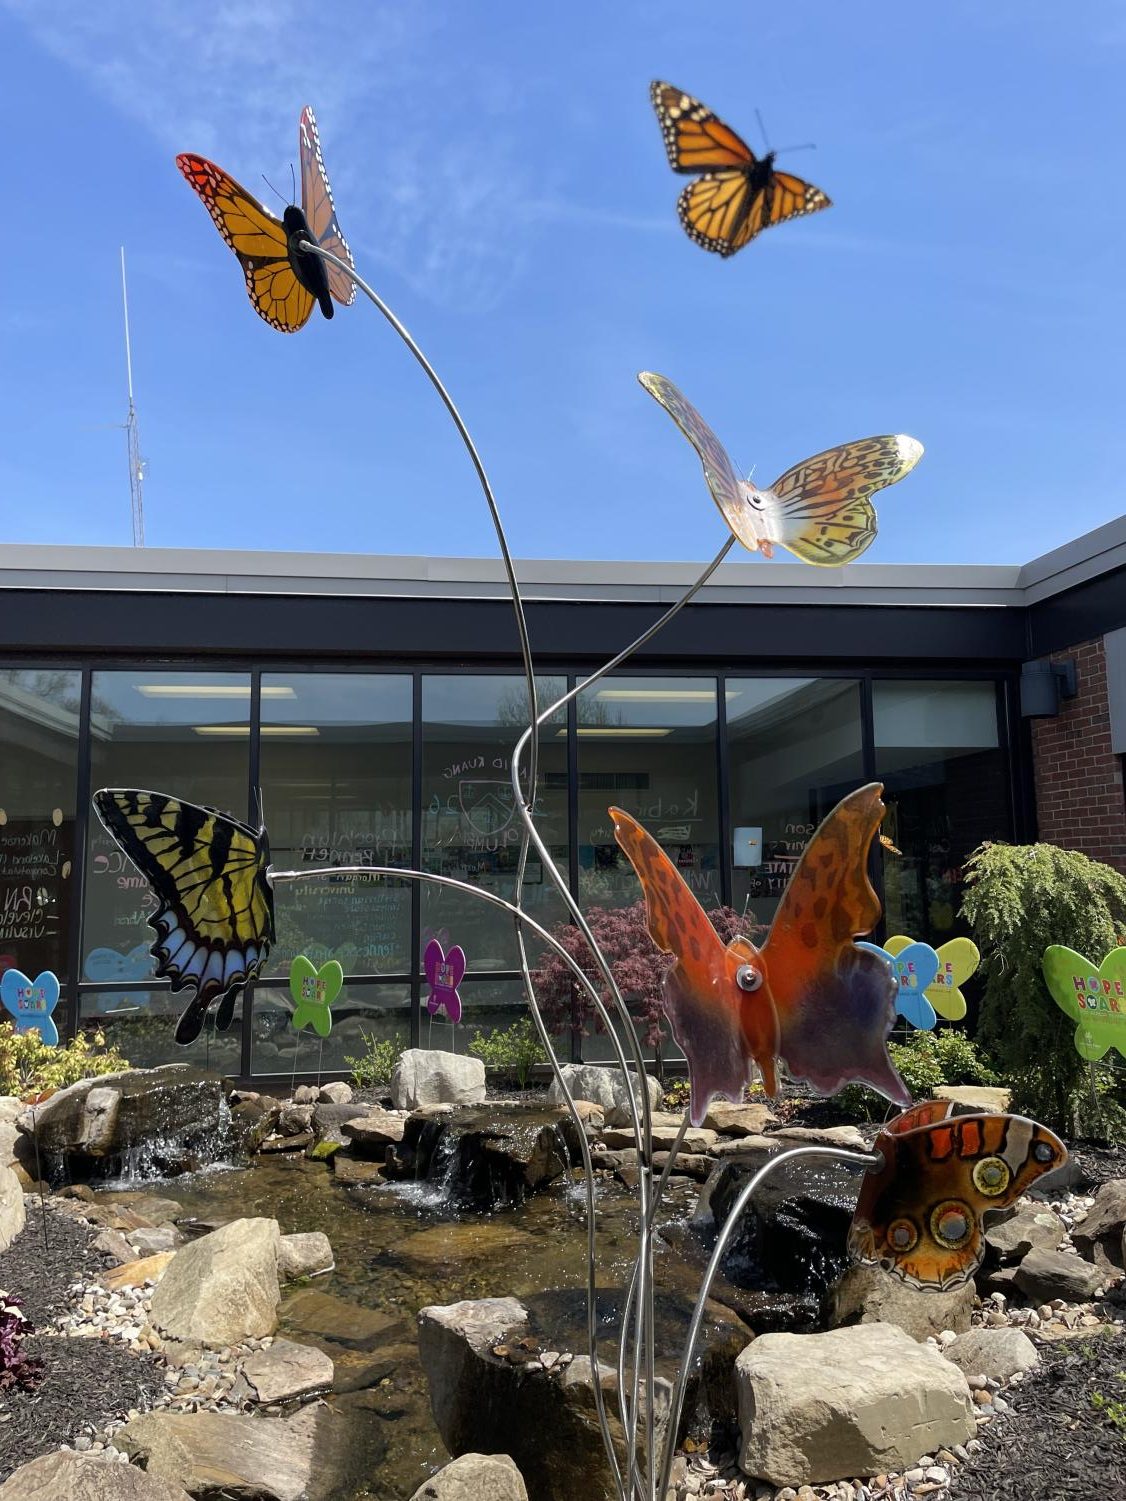 Marketing students also released 100 monarch butterflies on May 10 and contributed a  butterfly sculpture designed by Craig Mitchell Smith to the Karen Kushnir atrium.